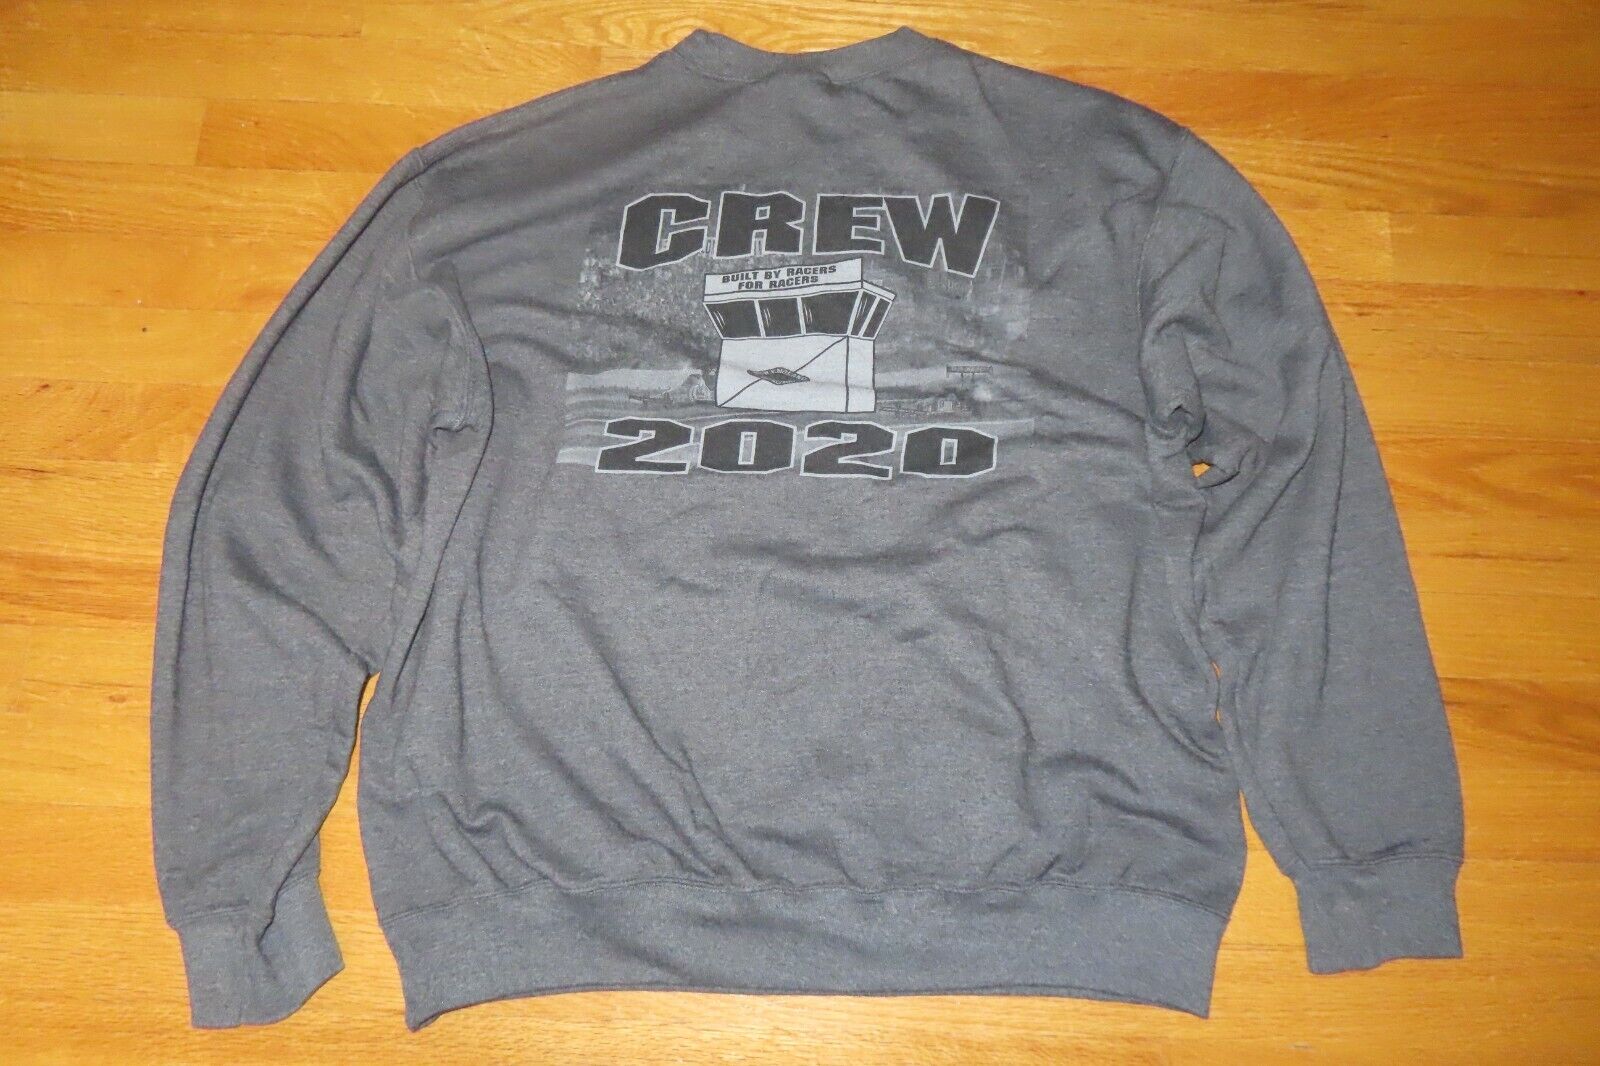 2020 NEW ENGLAND DRAGWAY Crew Built for Racers for Racers XL Sweatshirt DRAGSTER